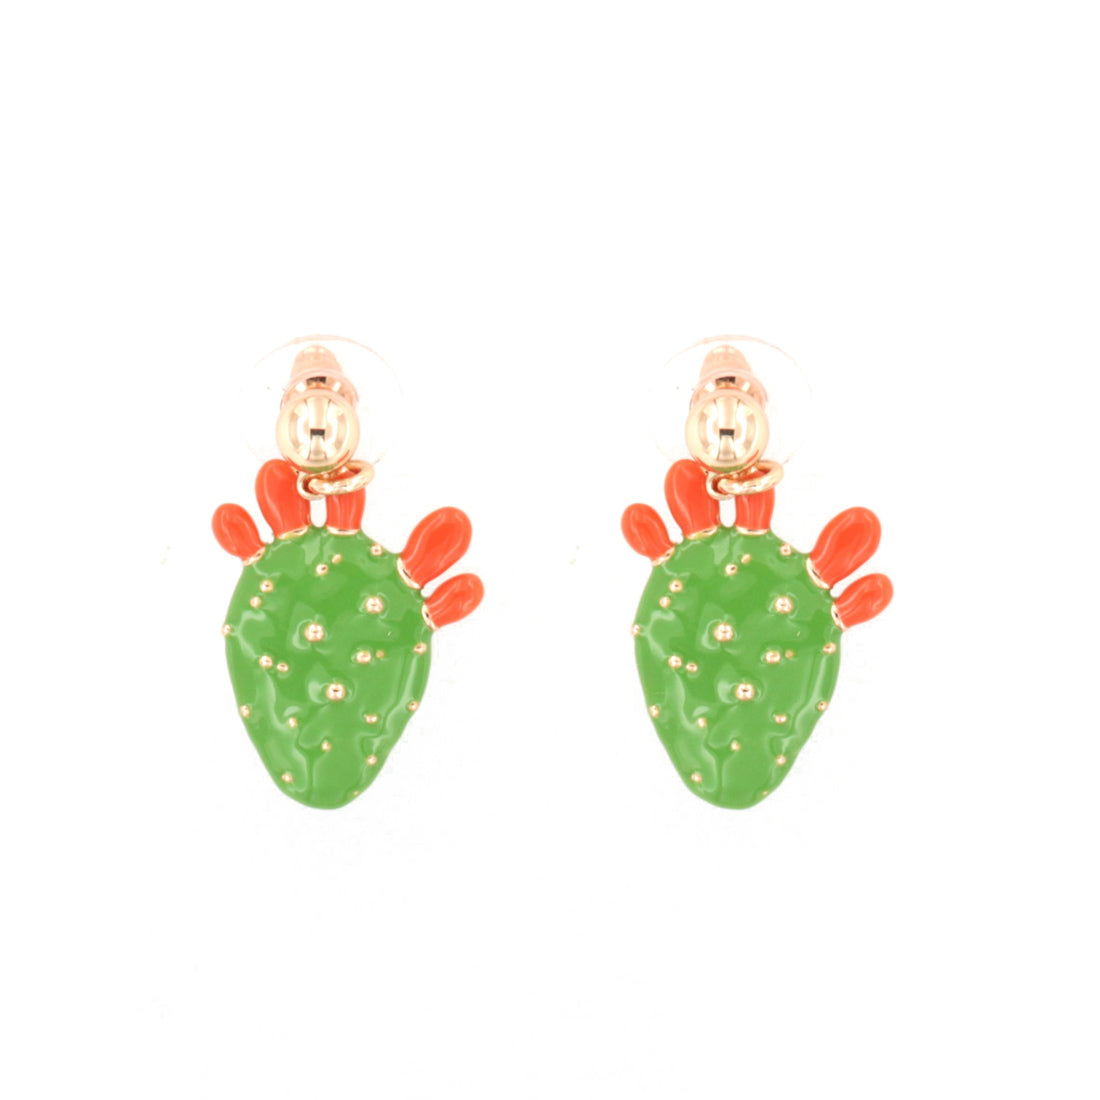 Metal earrings with pendant India fig, embellished with green enamel and red enamel tips